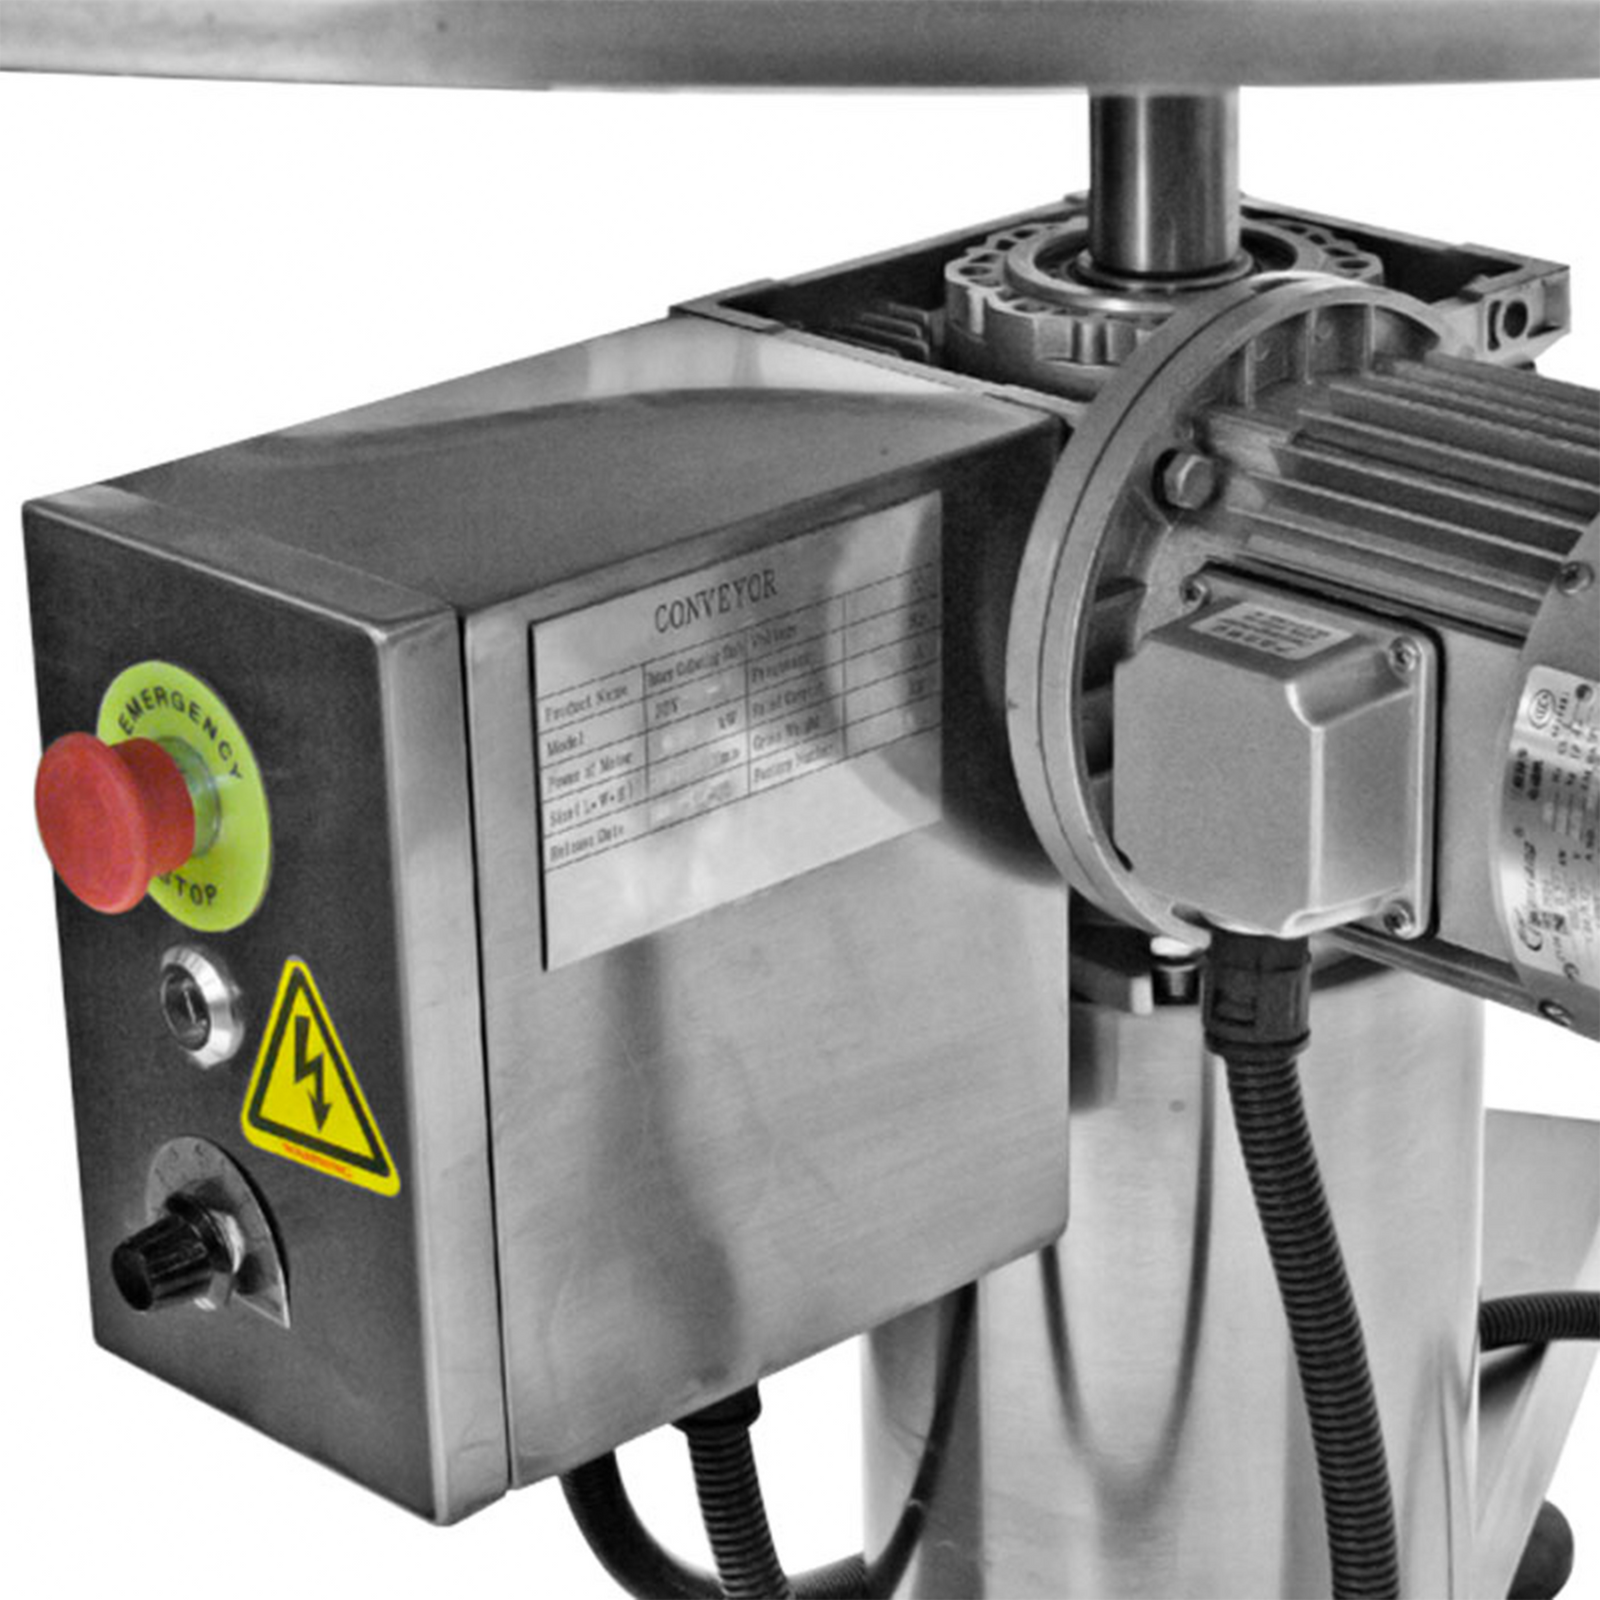 close up of stainless steel JORESTECH rotary accumulating table with red emergency stop bottom and yellow warning label